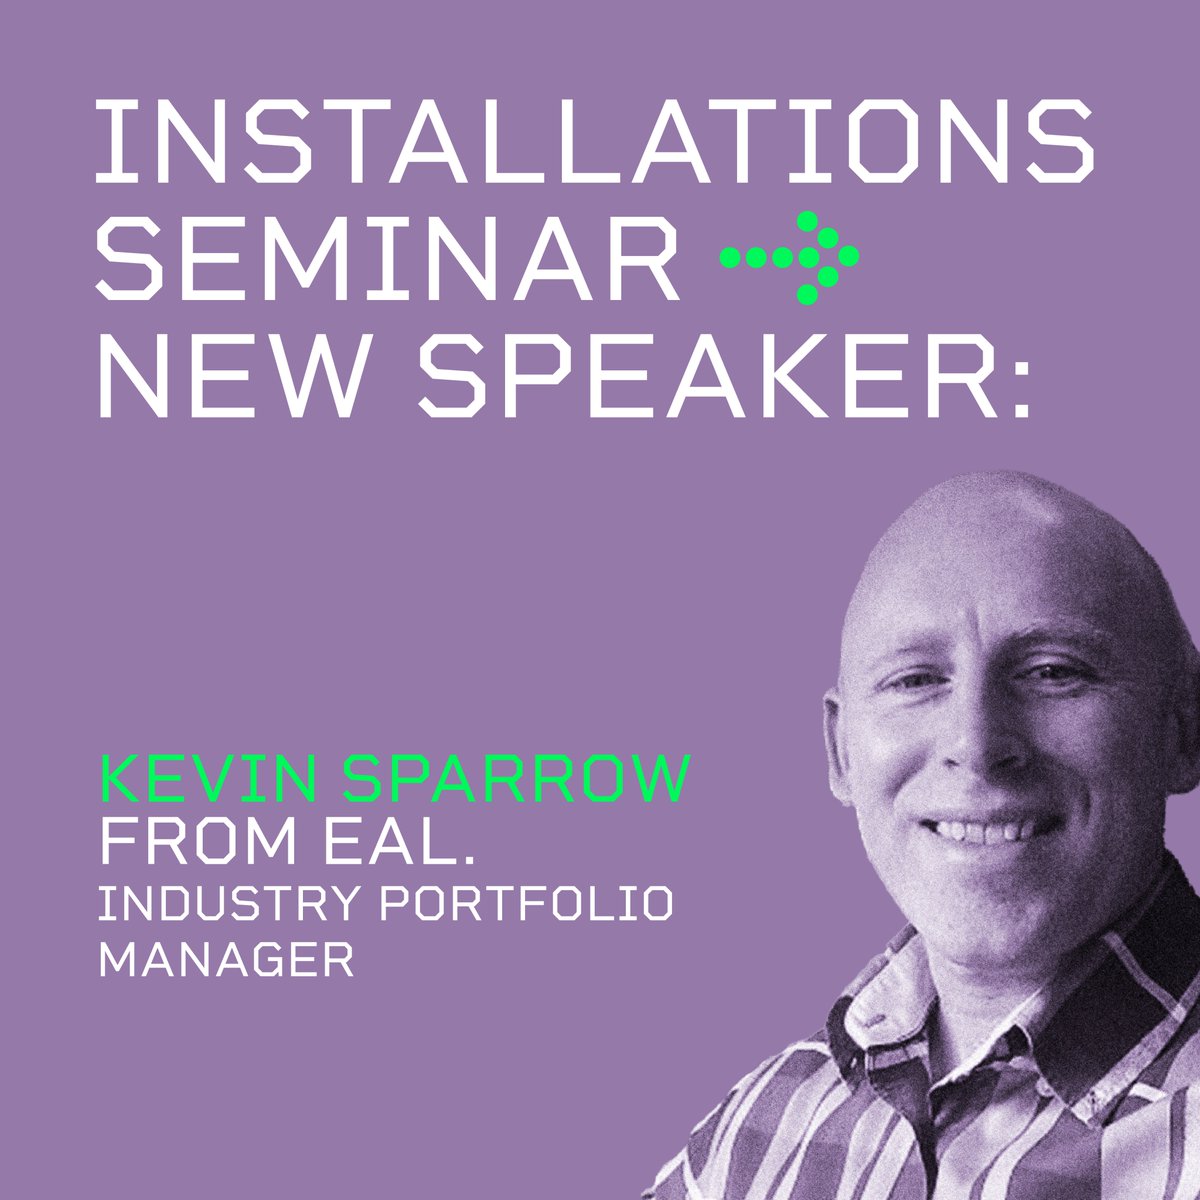 🎤Meet our latest speakers joining us at the Electrical Installation Seminar on 23 April. We have an array of incredible speakers lined up. 💡 Don't miss out - grab your free tickets now: ow.ly/LXMU50QqUeP #SwitchOn24 #SwitchToSolutions